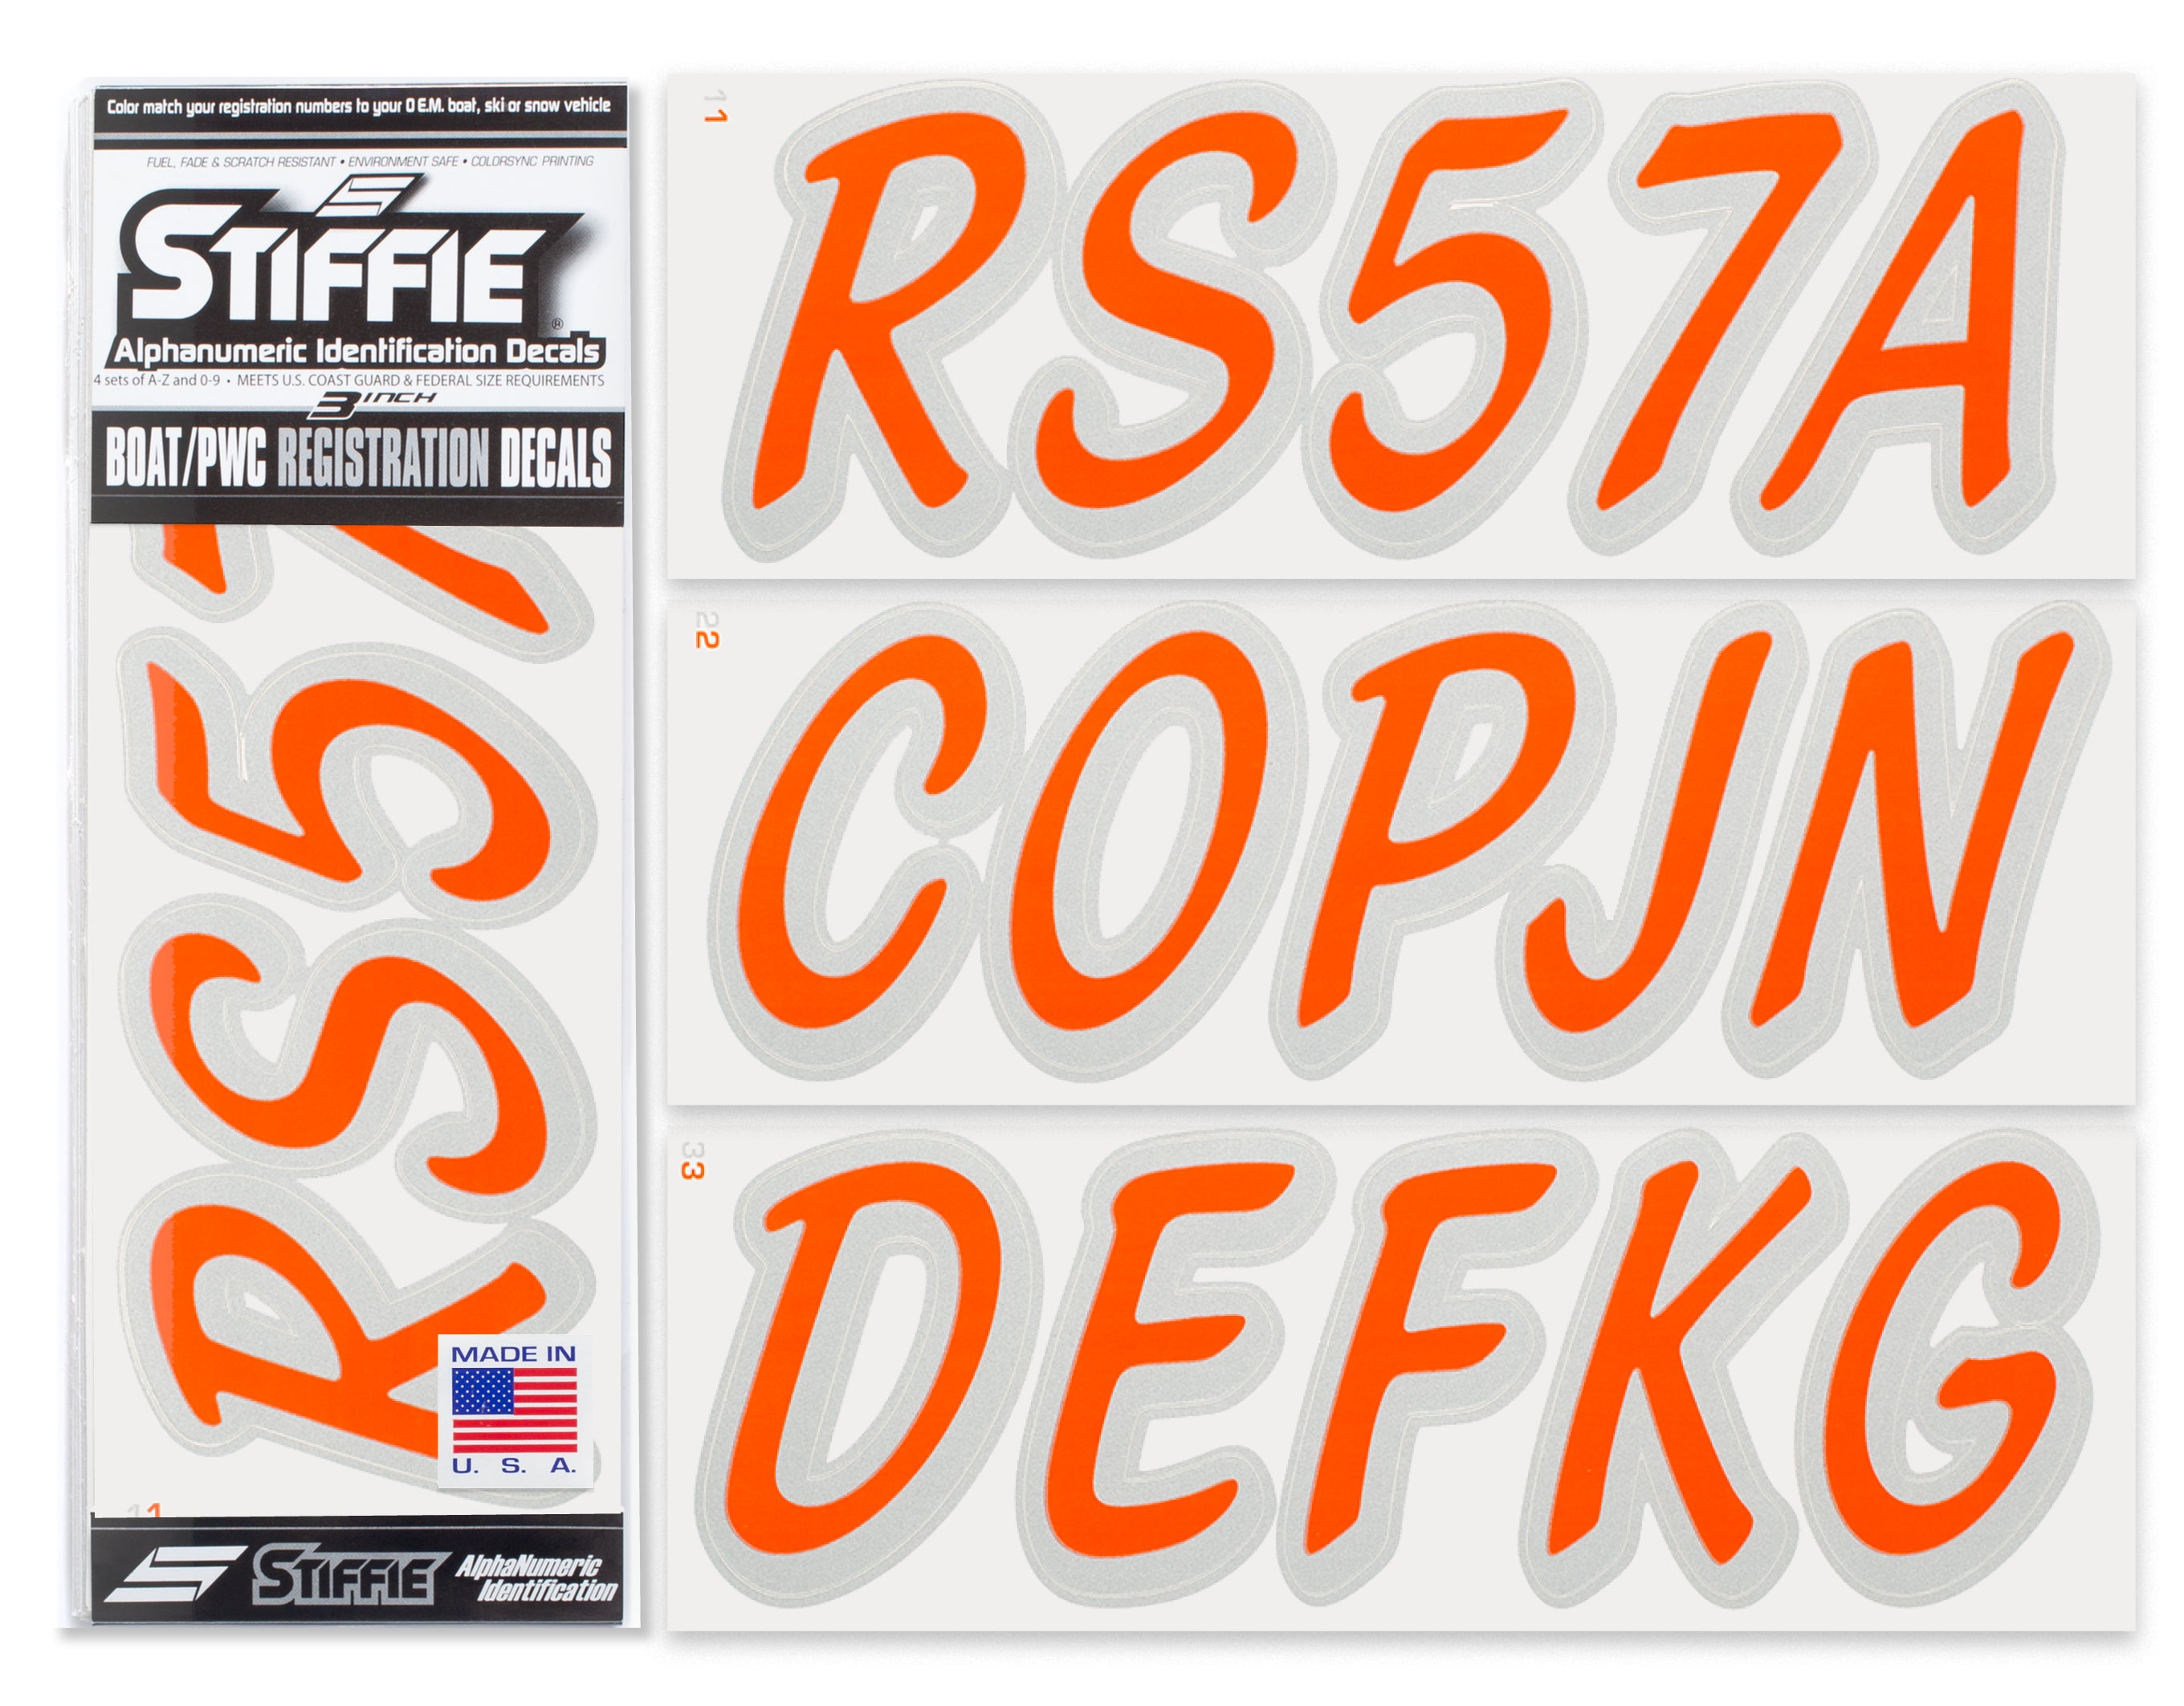 STIFFIE Whipline Solid Orange/Metallic Silver 3" Alpha-Numeric Registration Identification Numbers Stickers Decals for Boats & Personal Watercraft